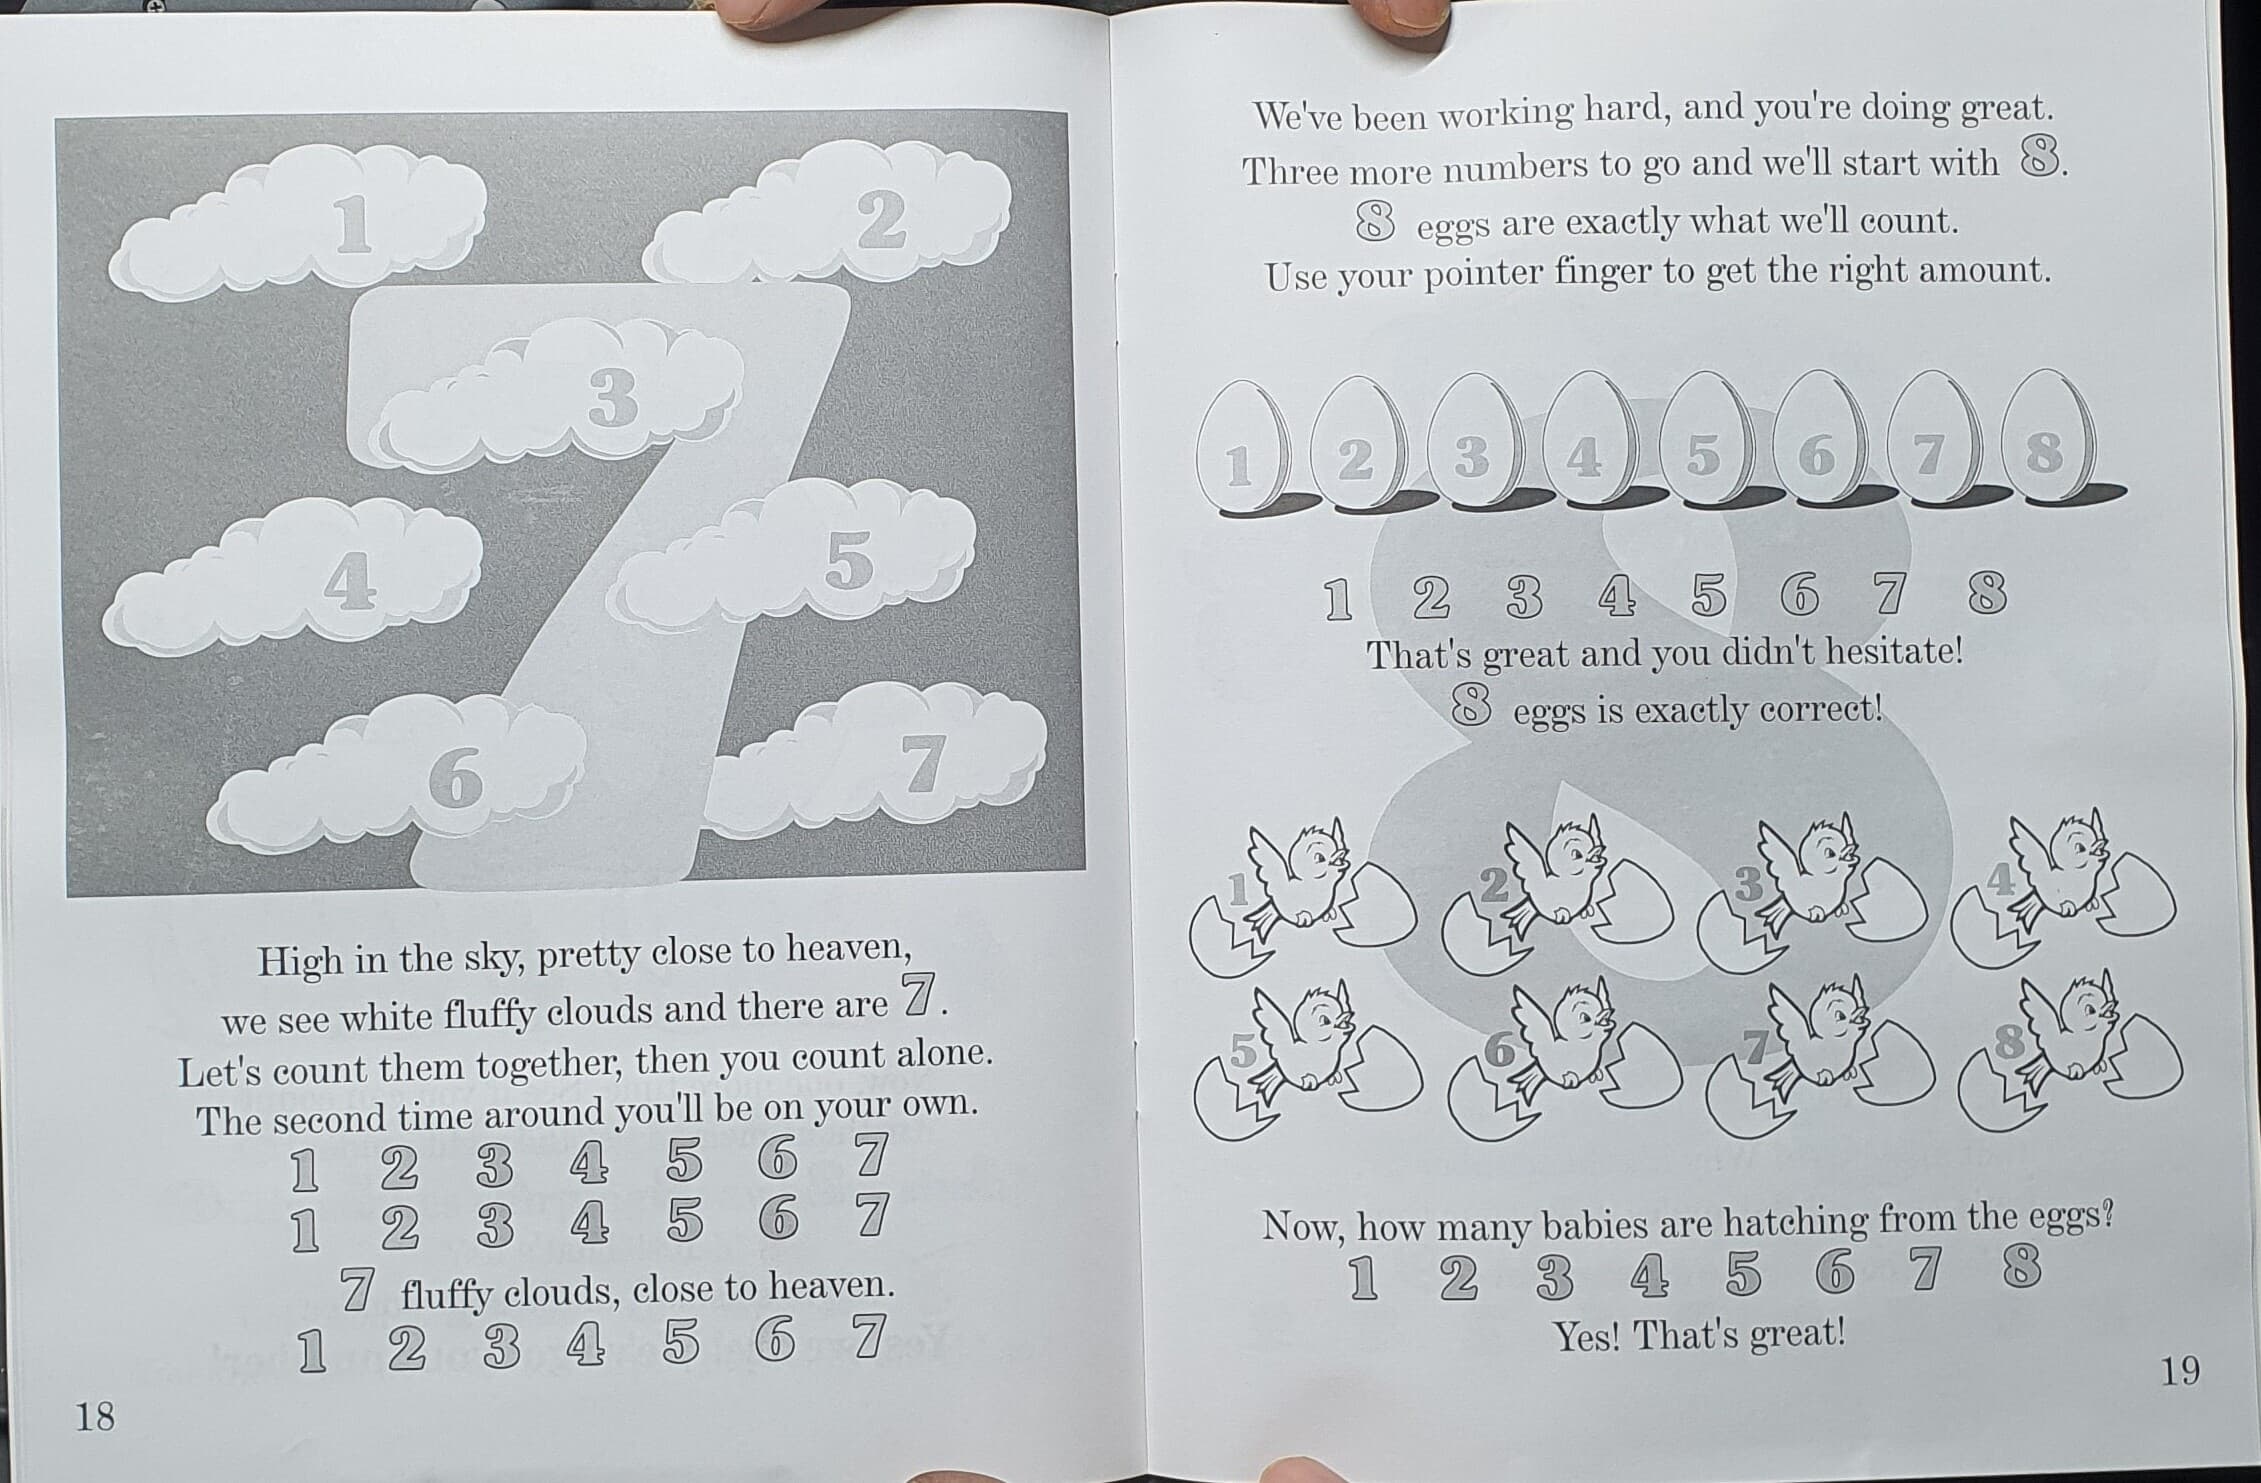 Children learn through rhyme and rhythm interactive numbers 